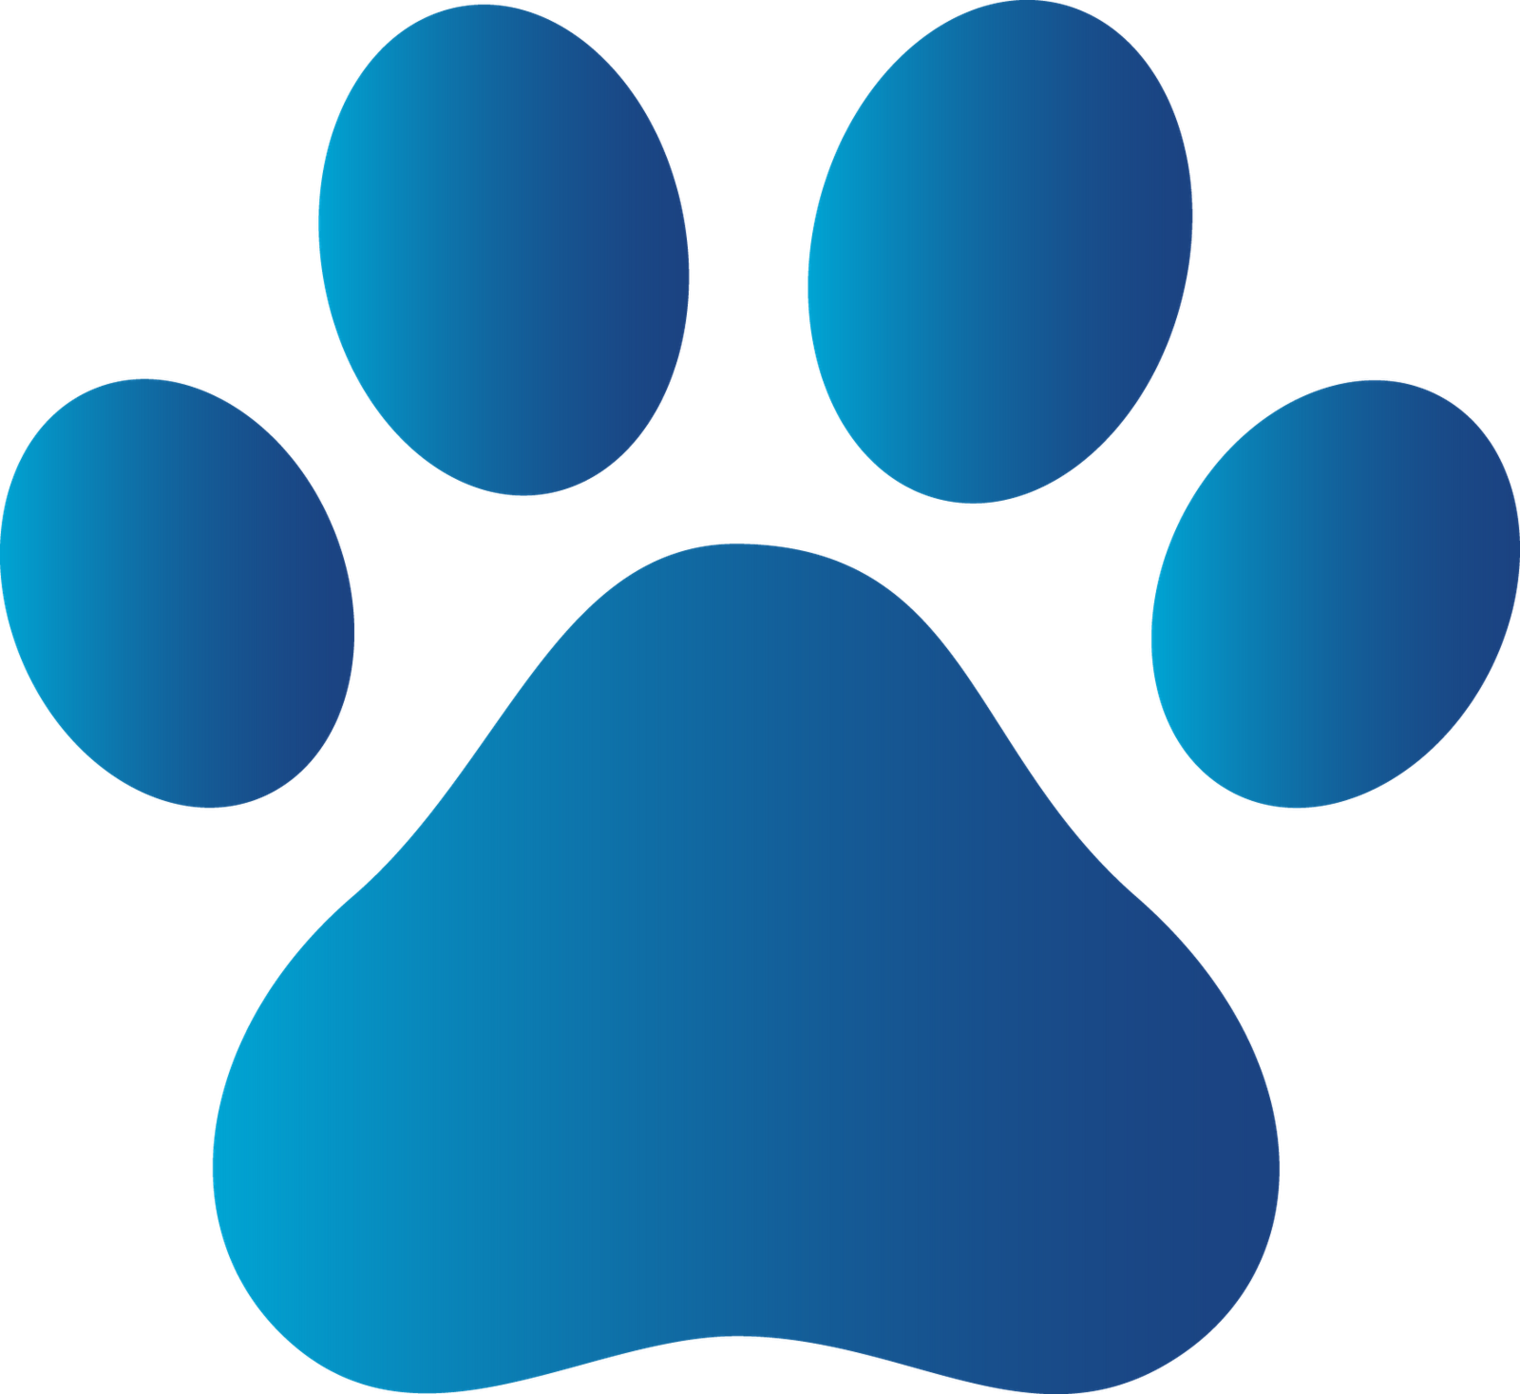 Cartoon Dog Paw Print Clipart - Free to use Clip Art Resource